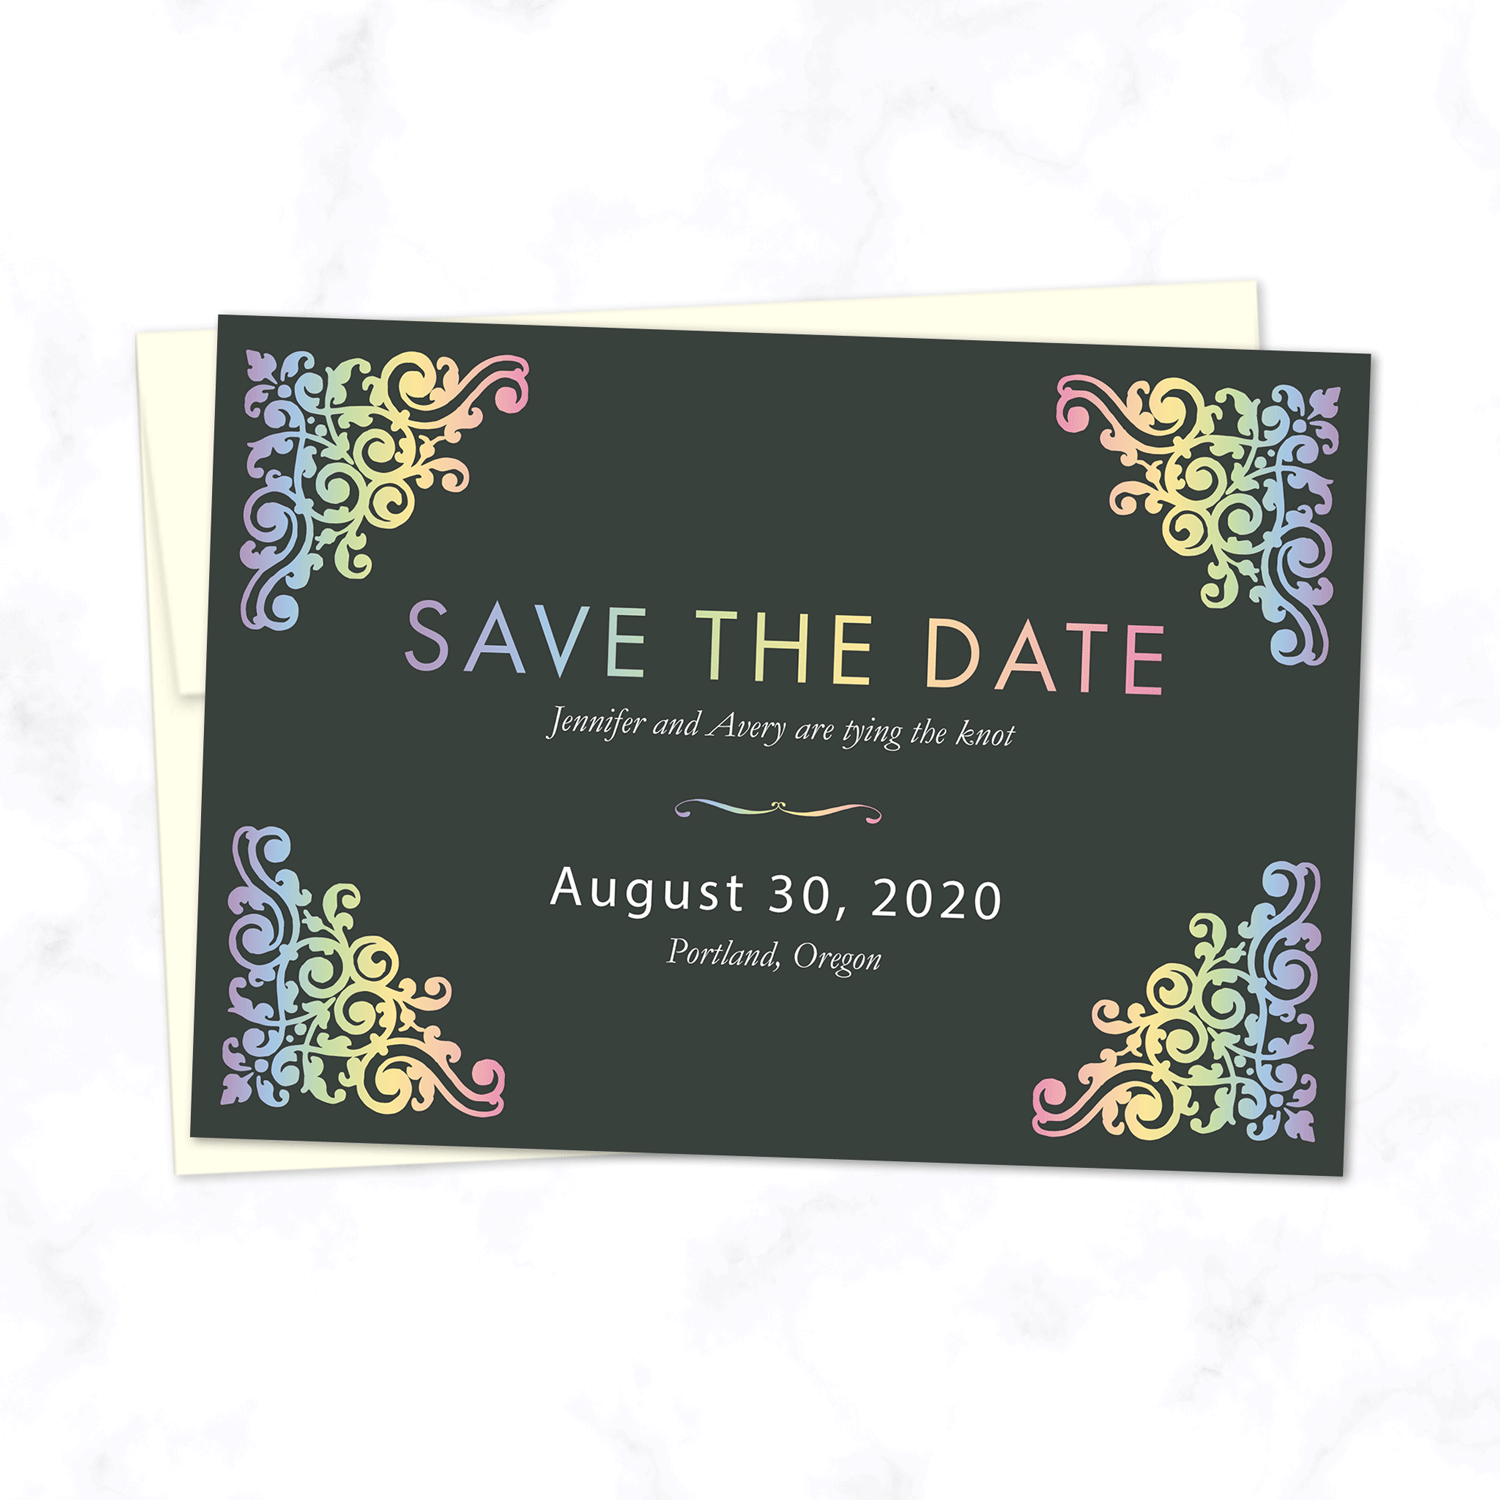 Pastel Rainbow Wedding Save the Date Card with Cream Envelope Included